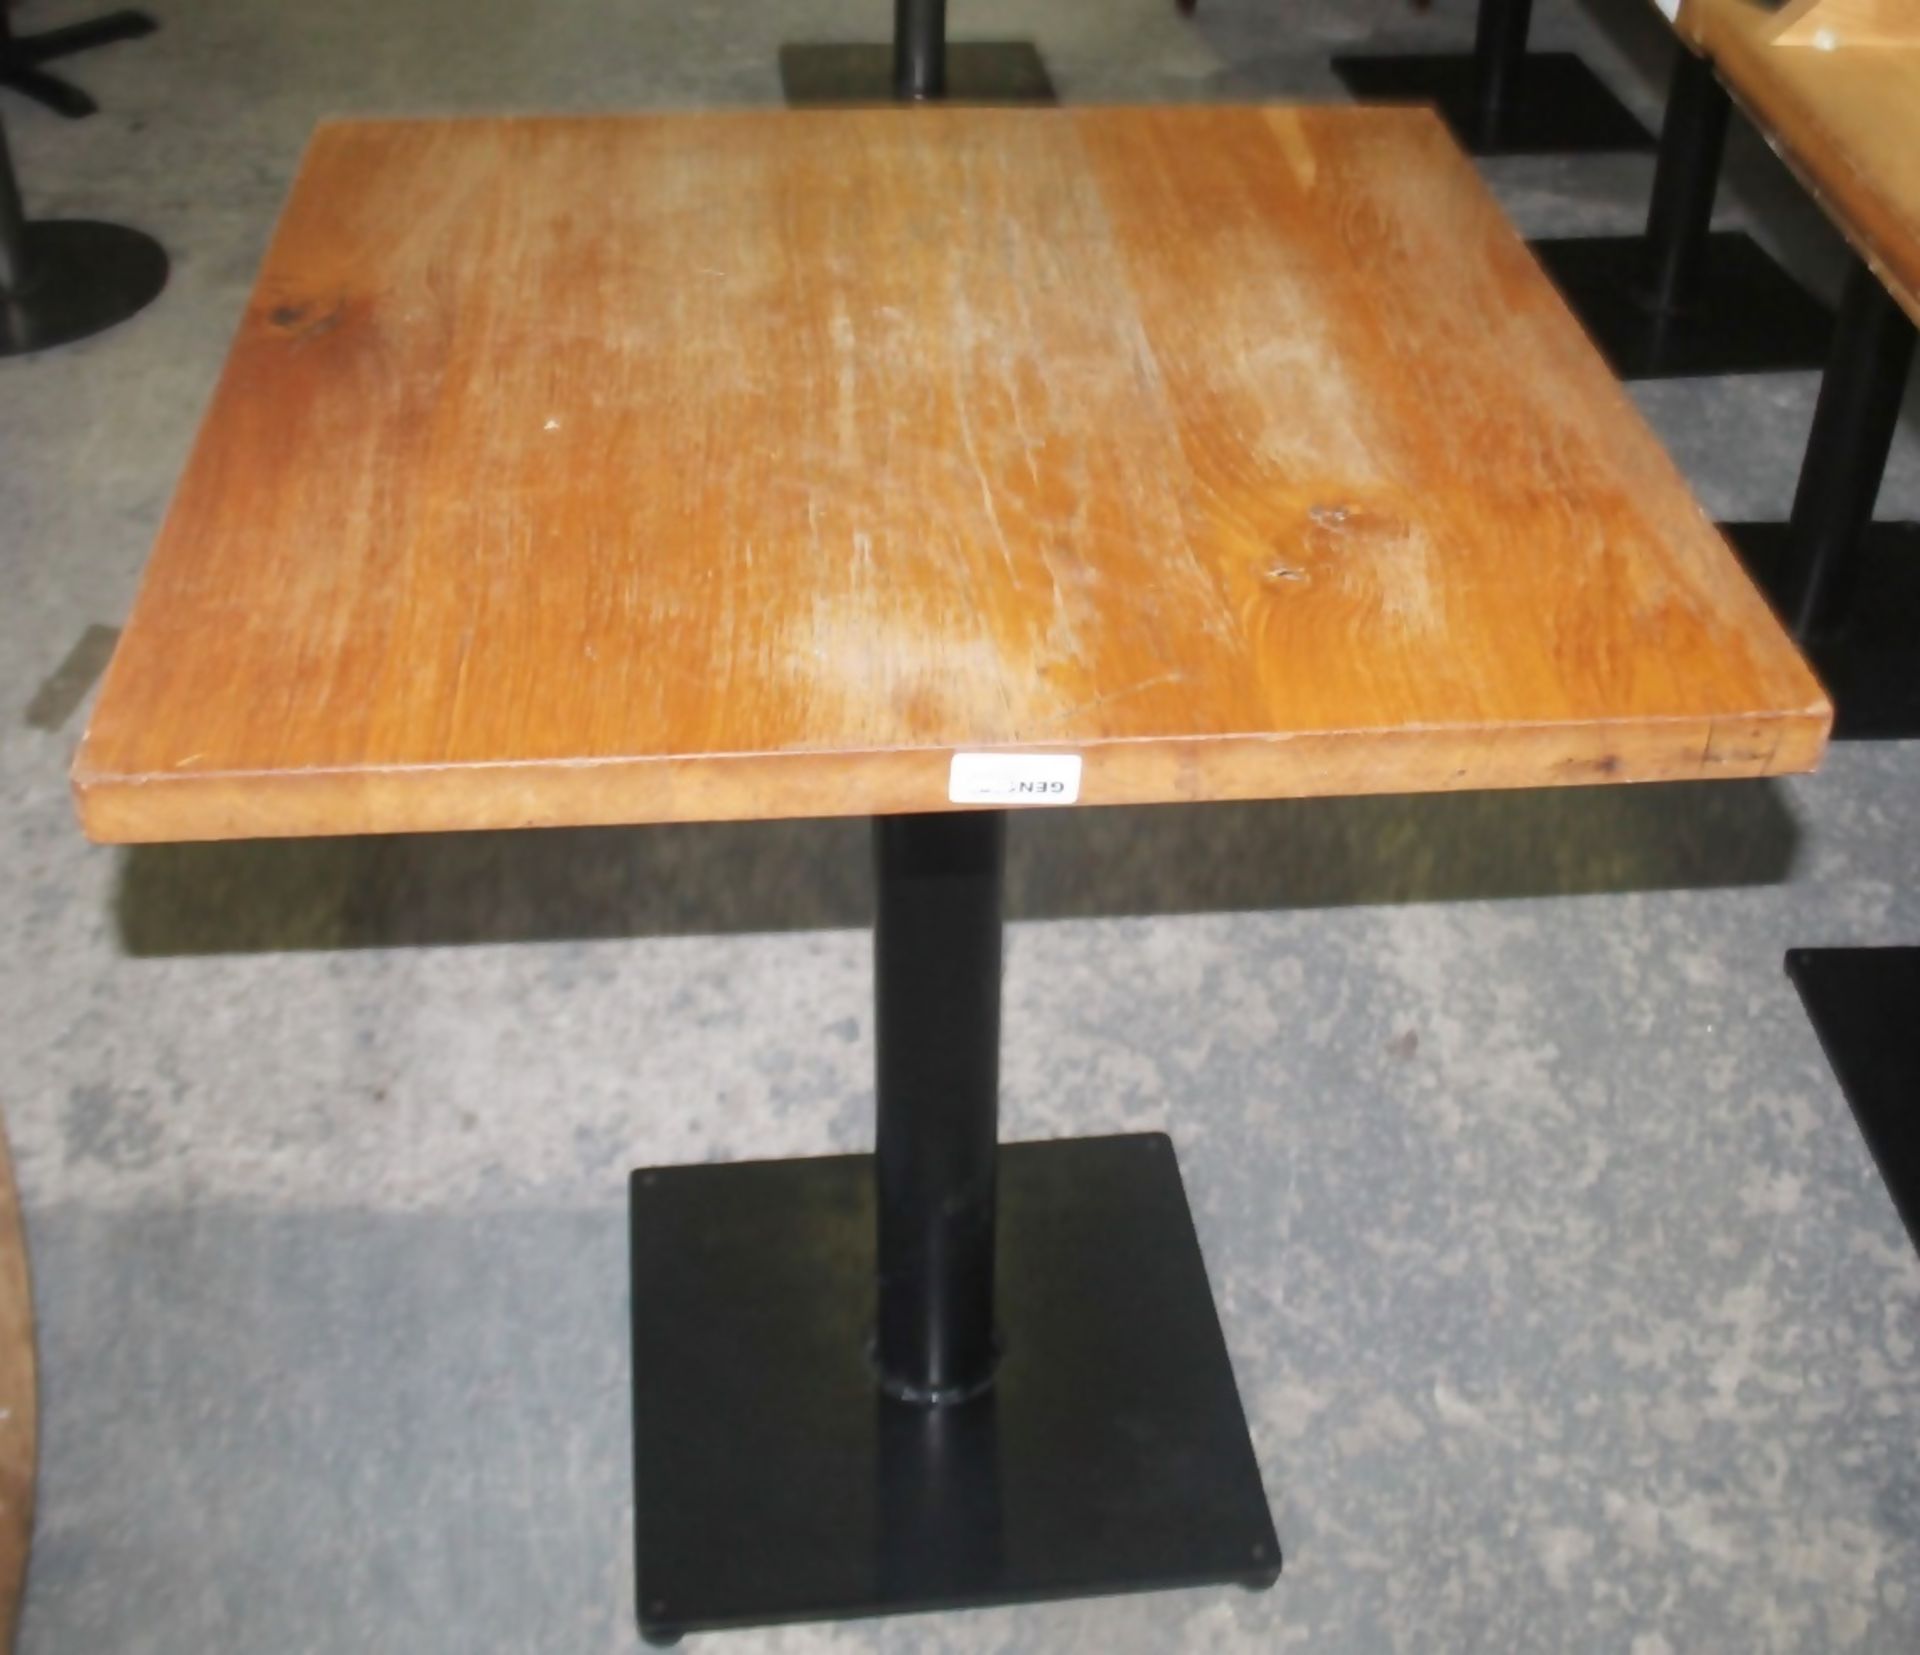 4 x Solid Oak Restaurant Dining Tables - Natural Rustic Knotty Oak Tops With Black Cast Iron Bases - Image 8 of 8